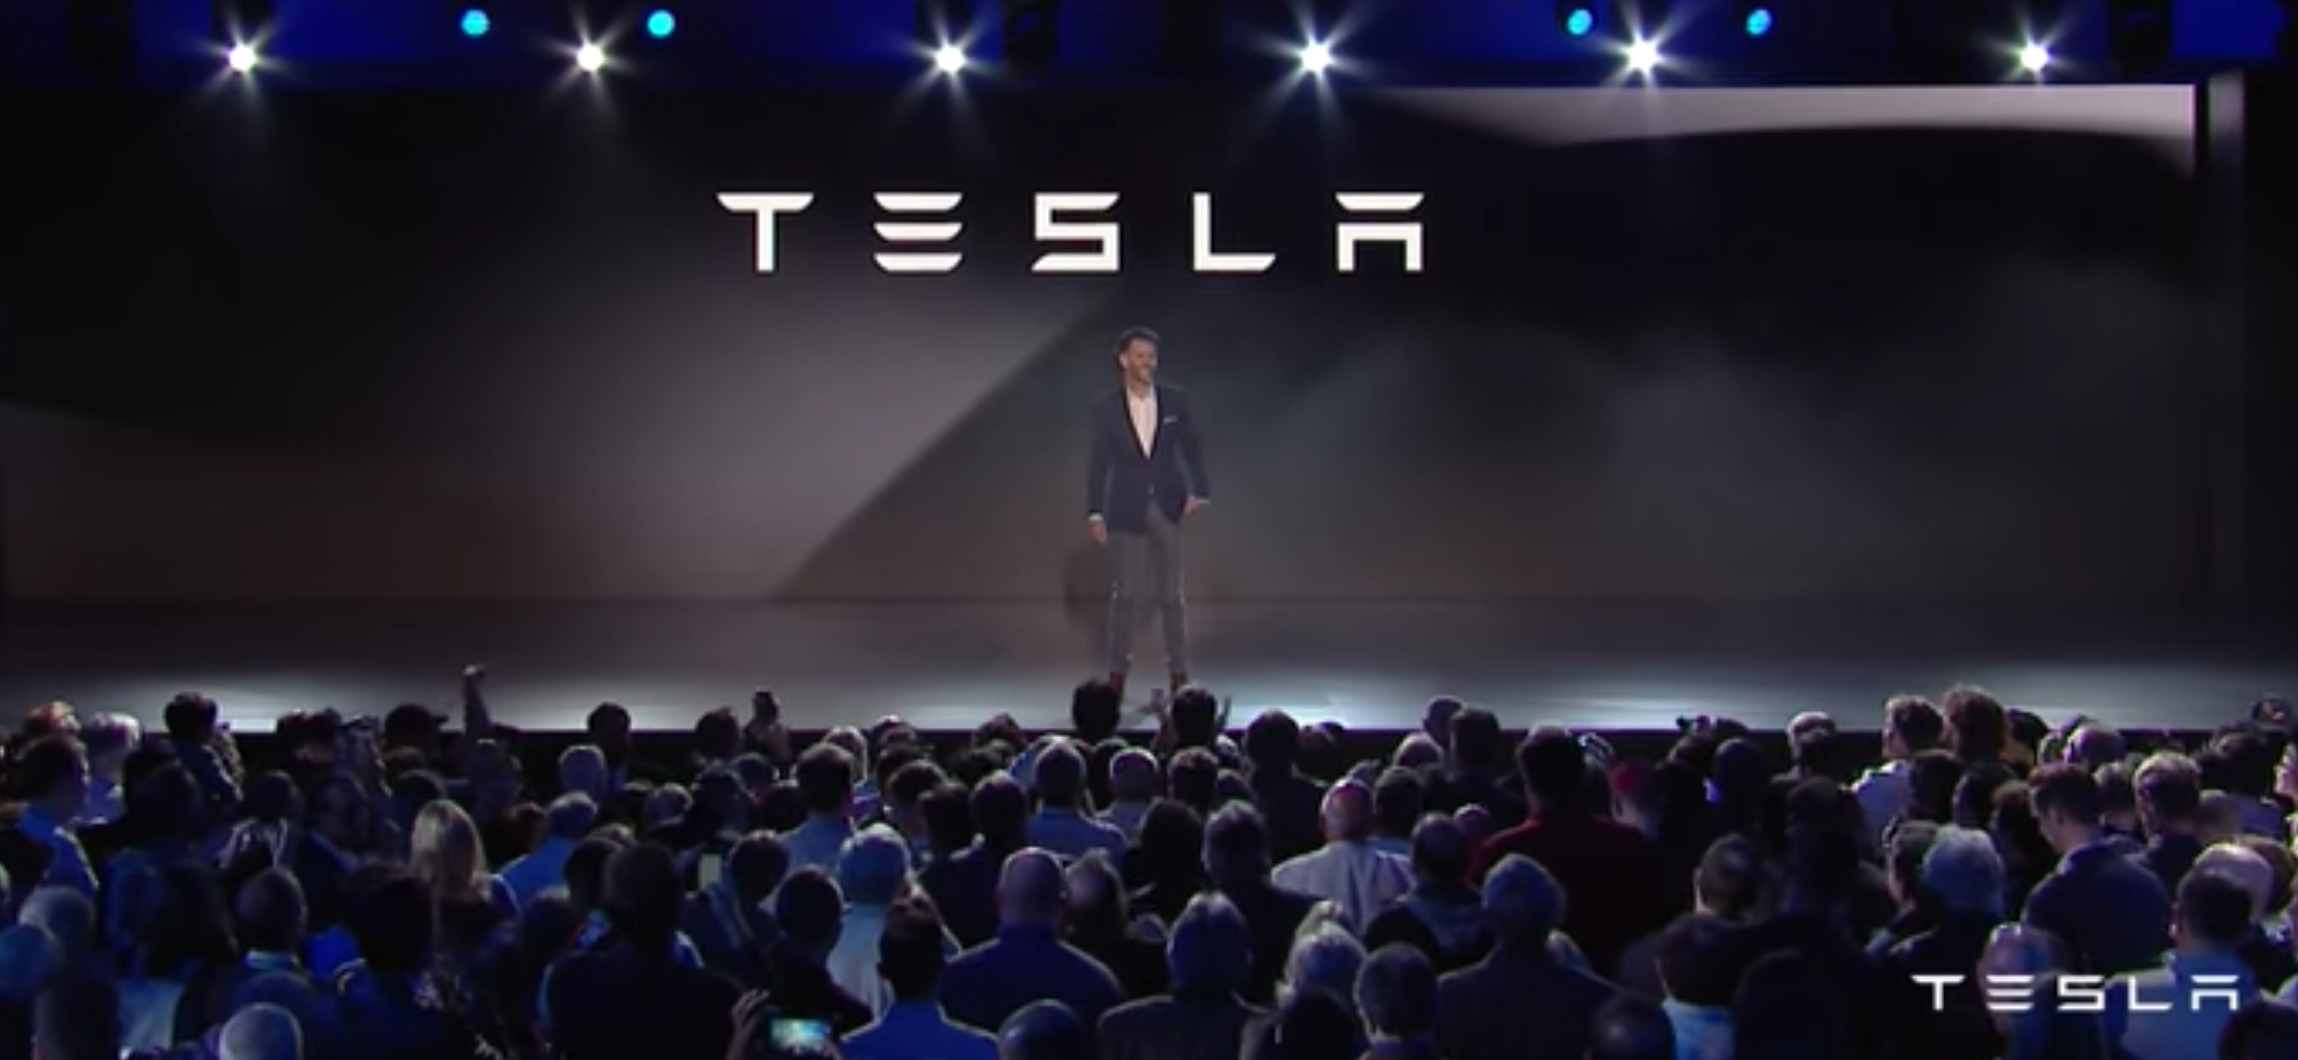 Elon Musk has a new Master Plan and it’s going to be fantastic, really. No, really.